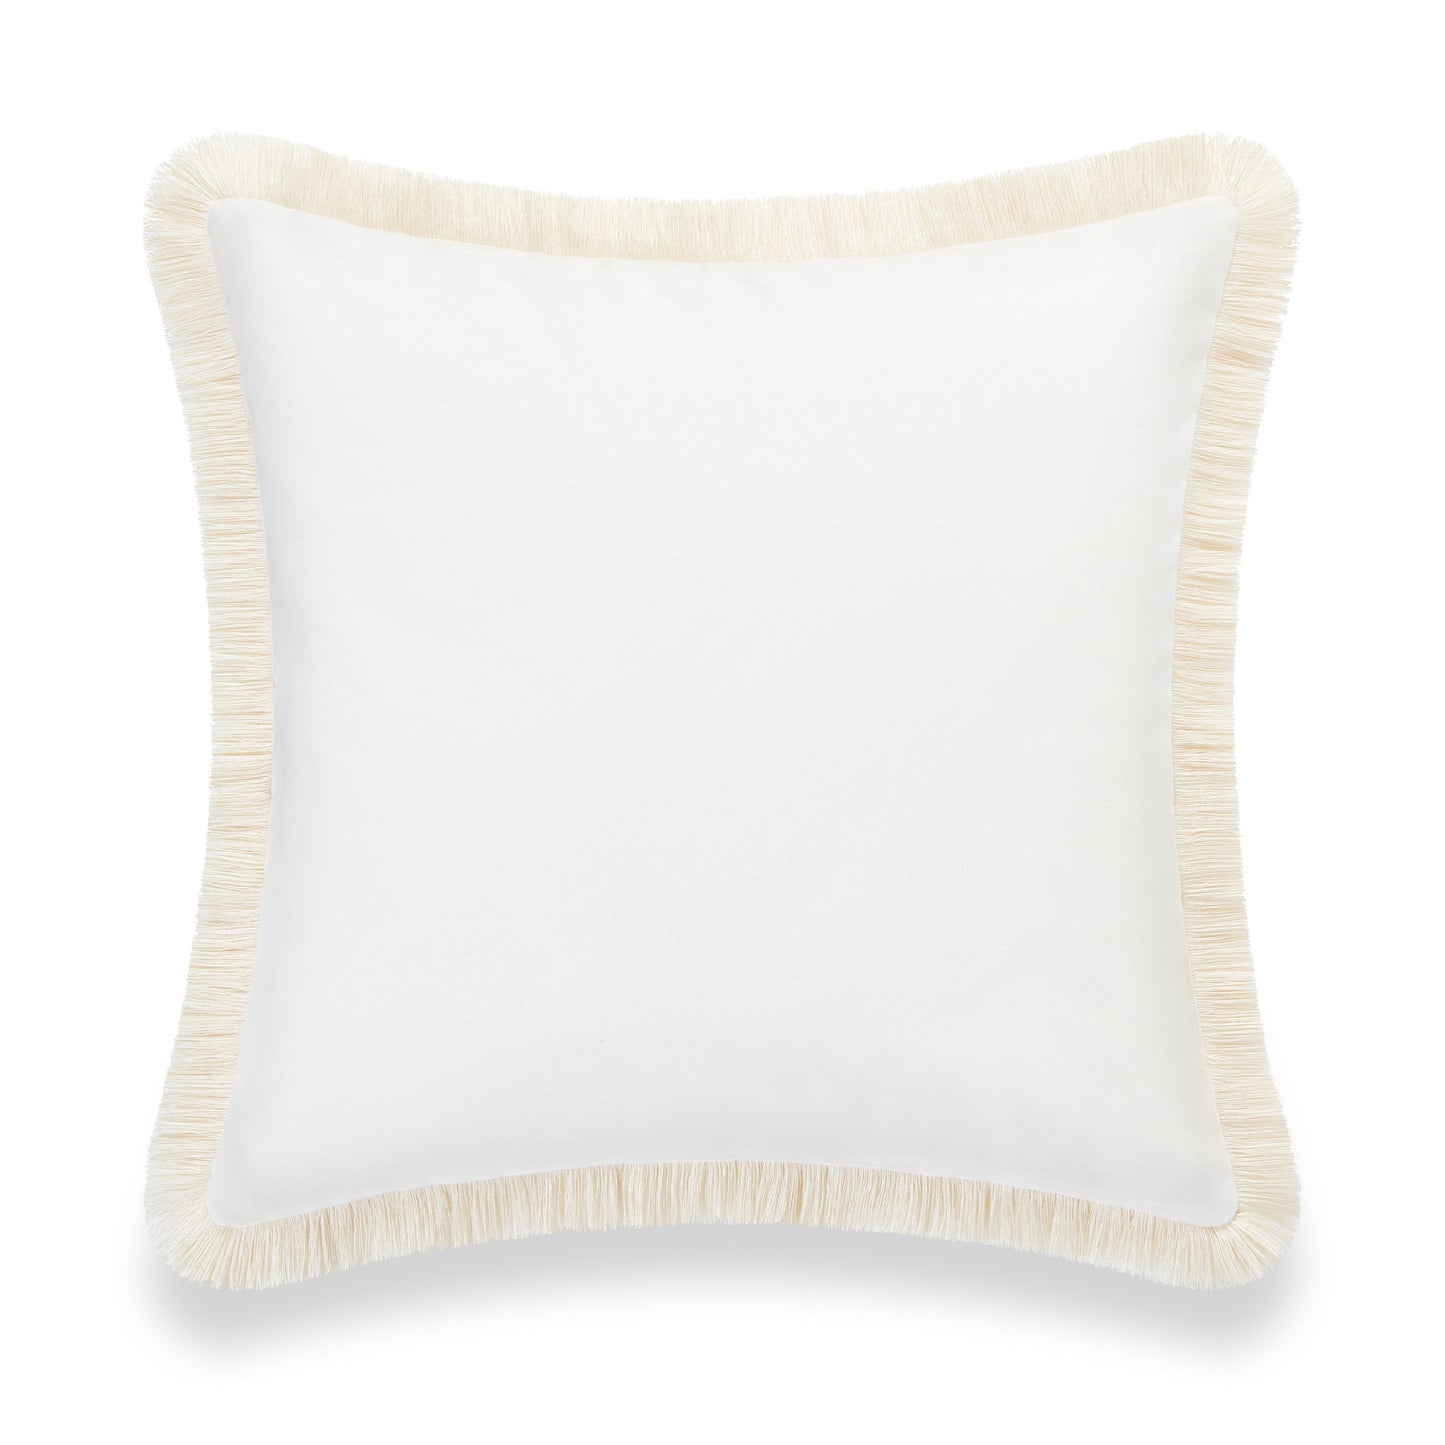 Coastal Indoor Outdoor Pillow Cover, Fringe, Solid White, 20"x20"-4